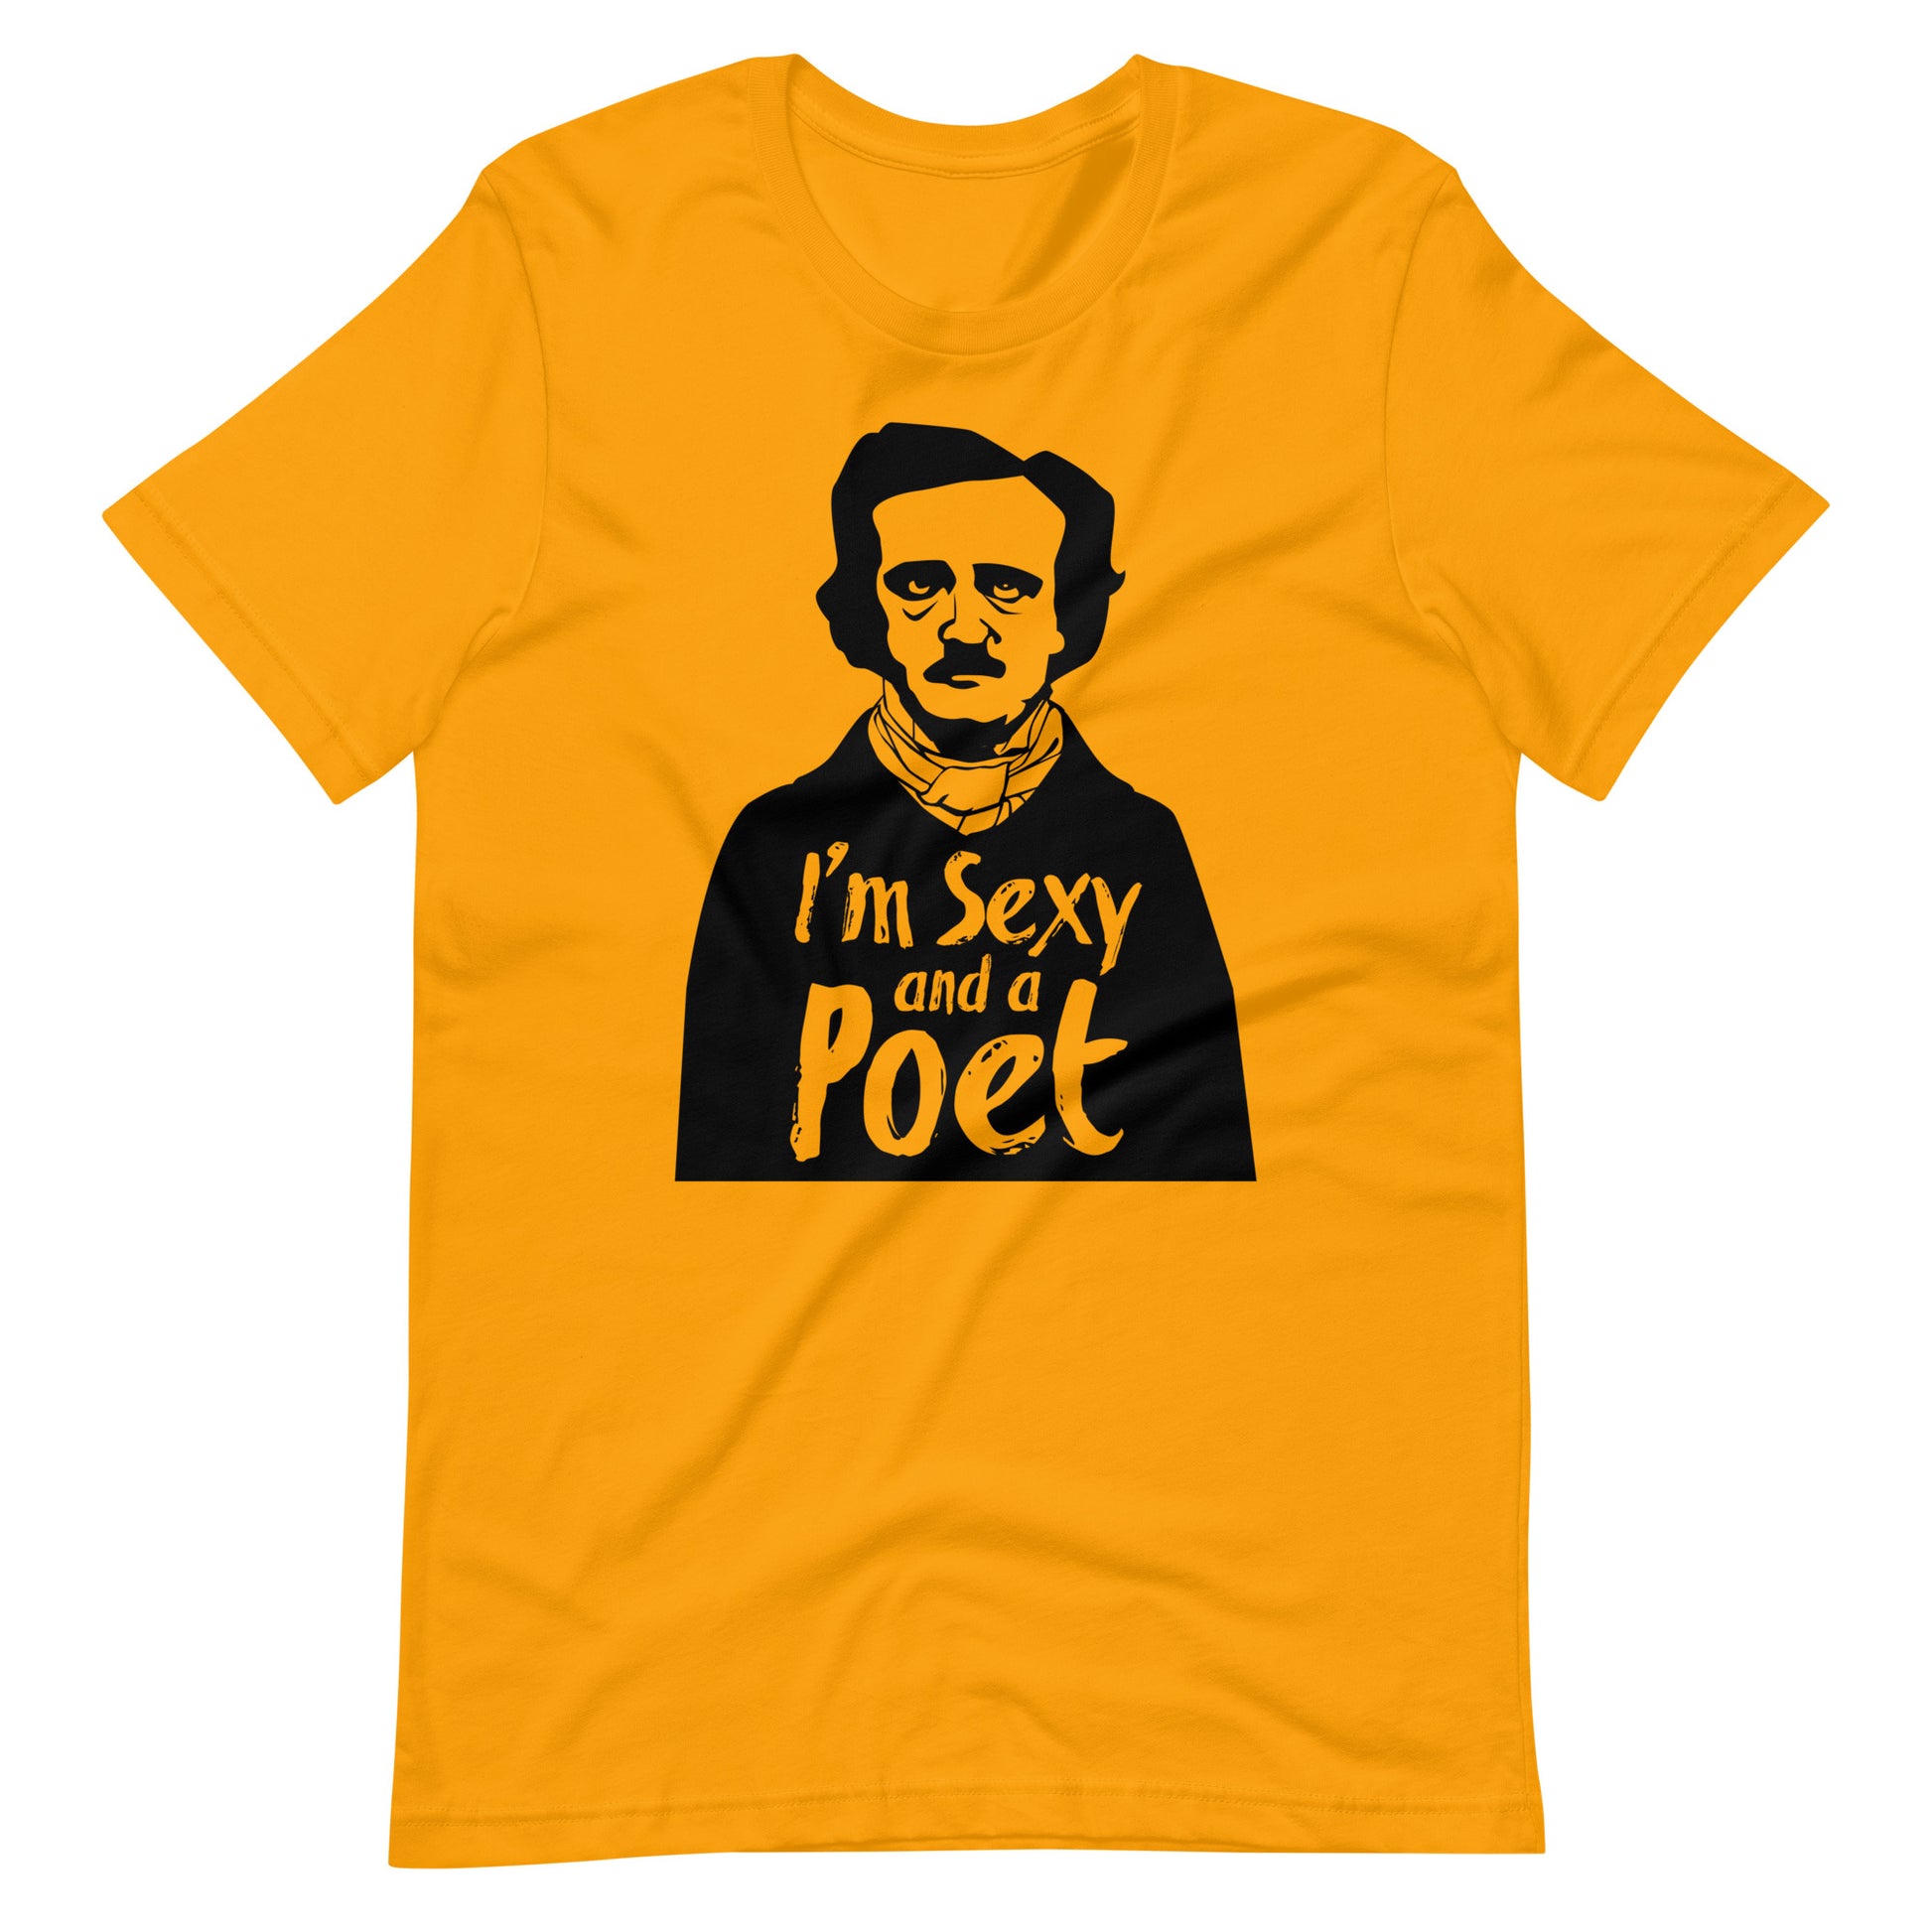 Women's Edgar Allan Poe "I'm Sexy and a Poet" t-shirt - Gold Front